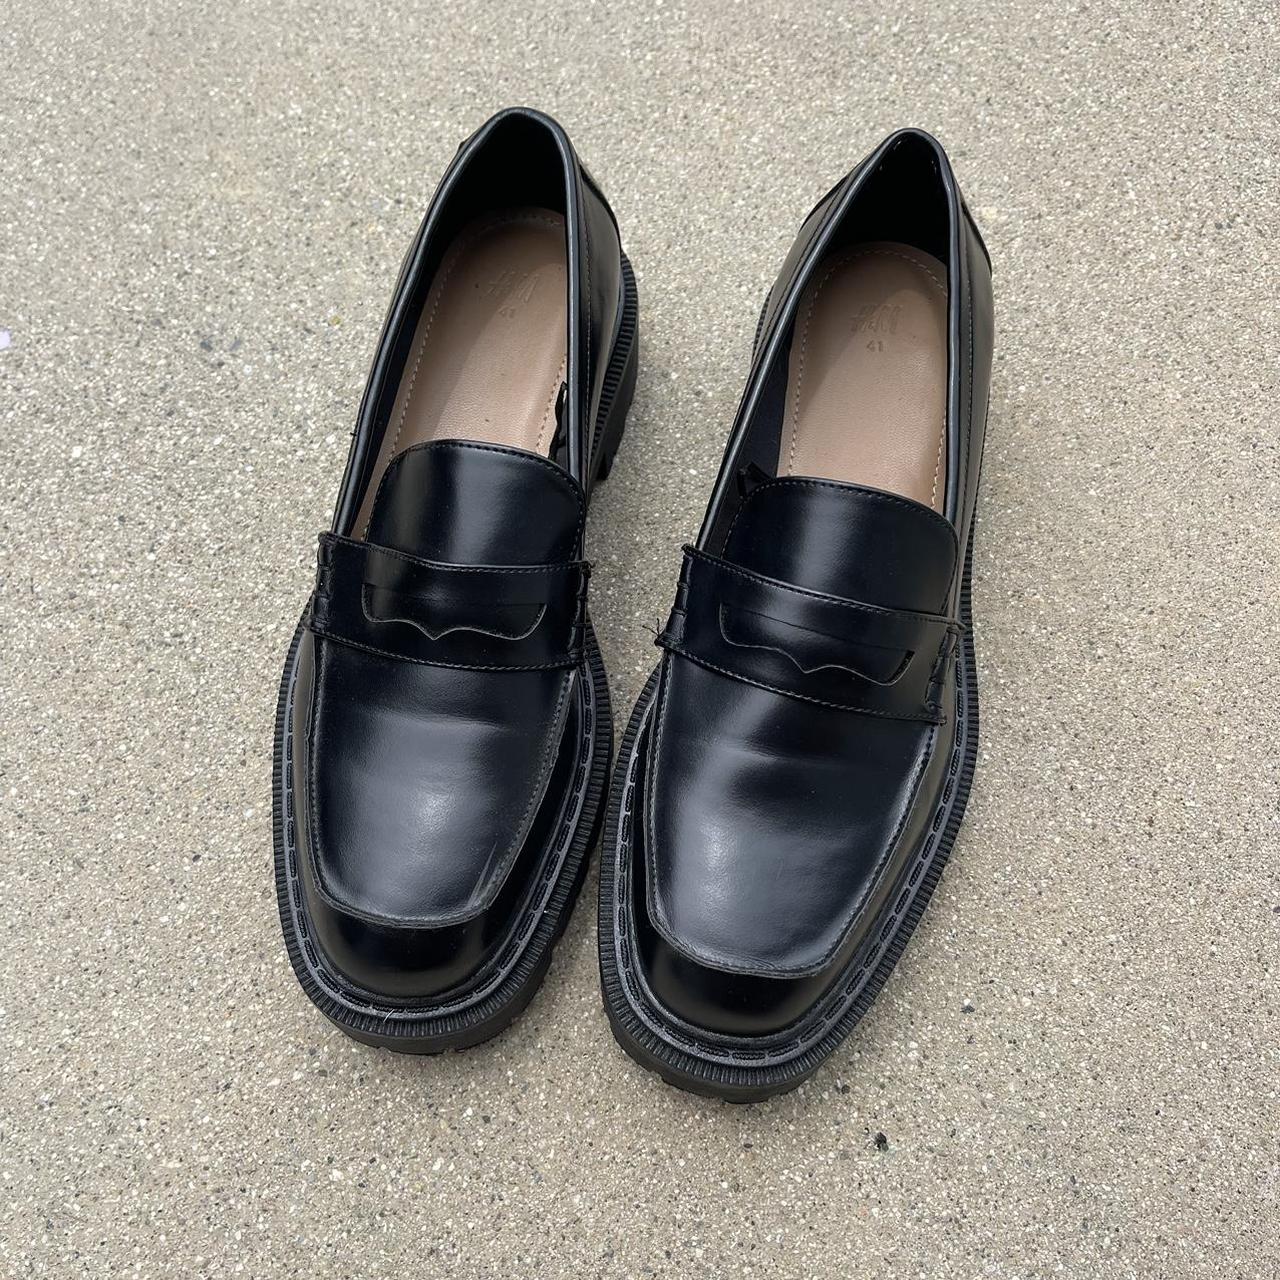 H&M Women's Black Loafers (2)